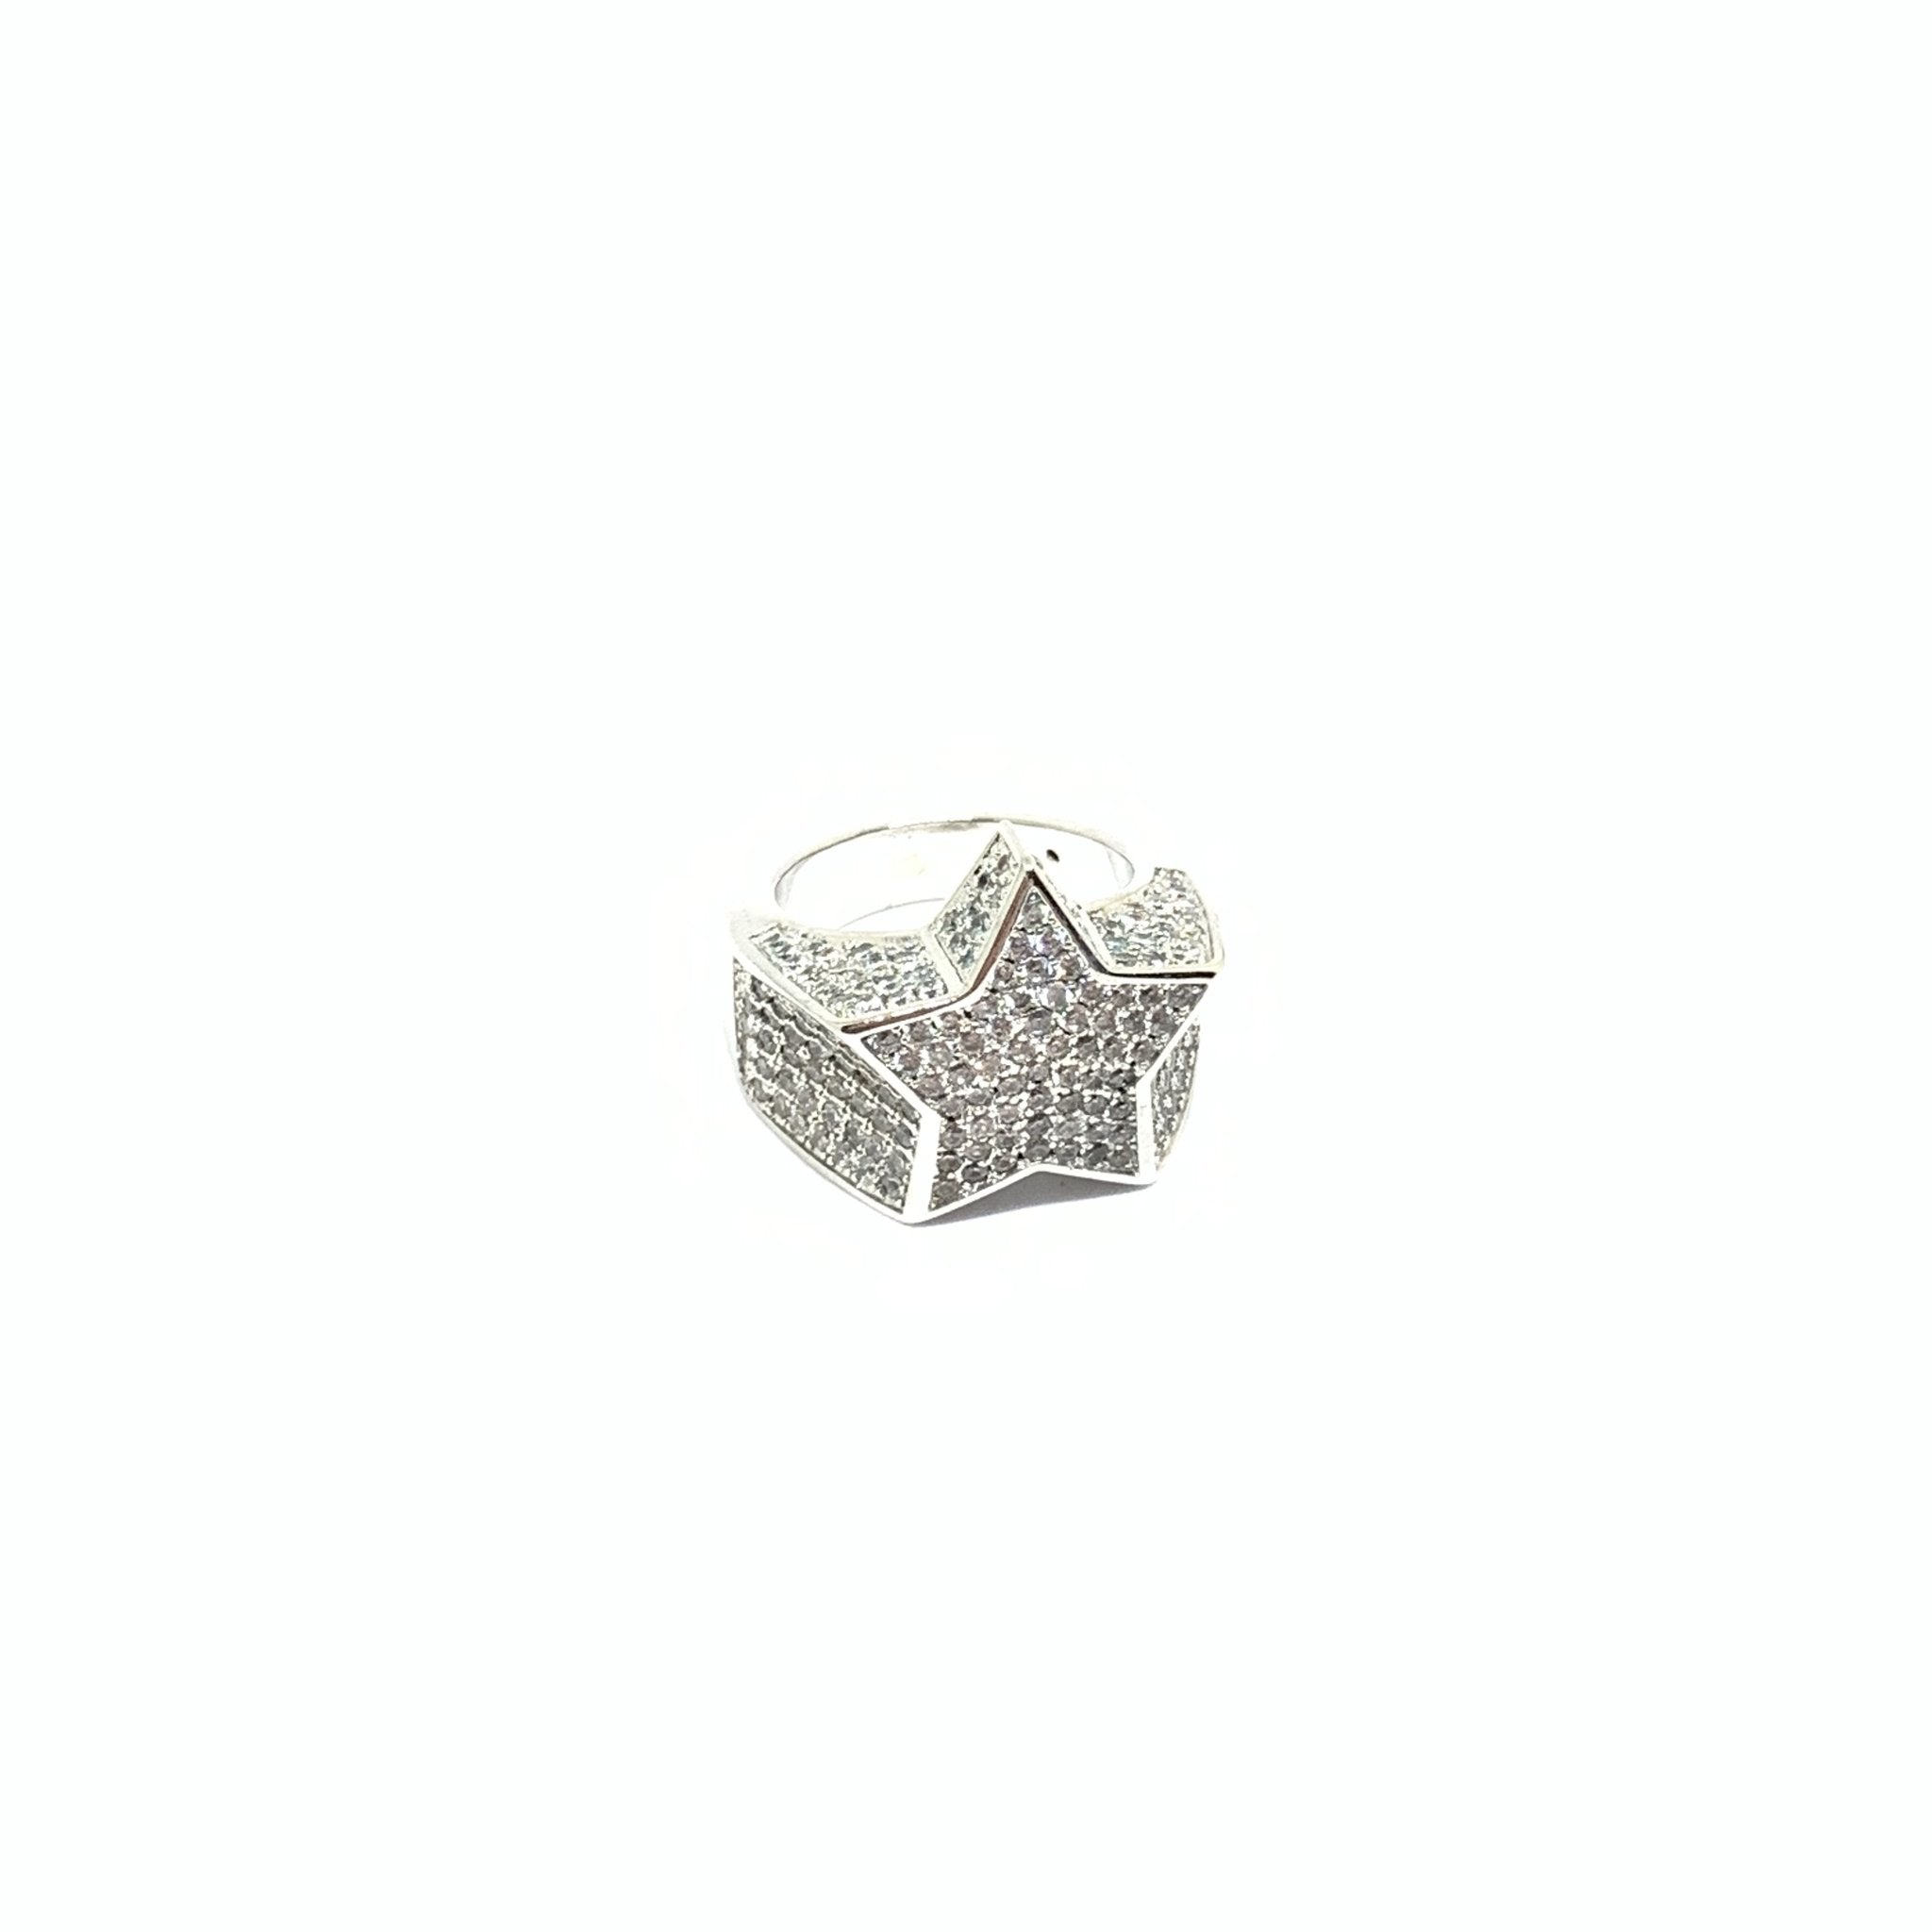 EK | Ice Out Star Ring Silver